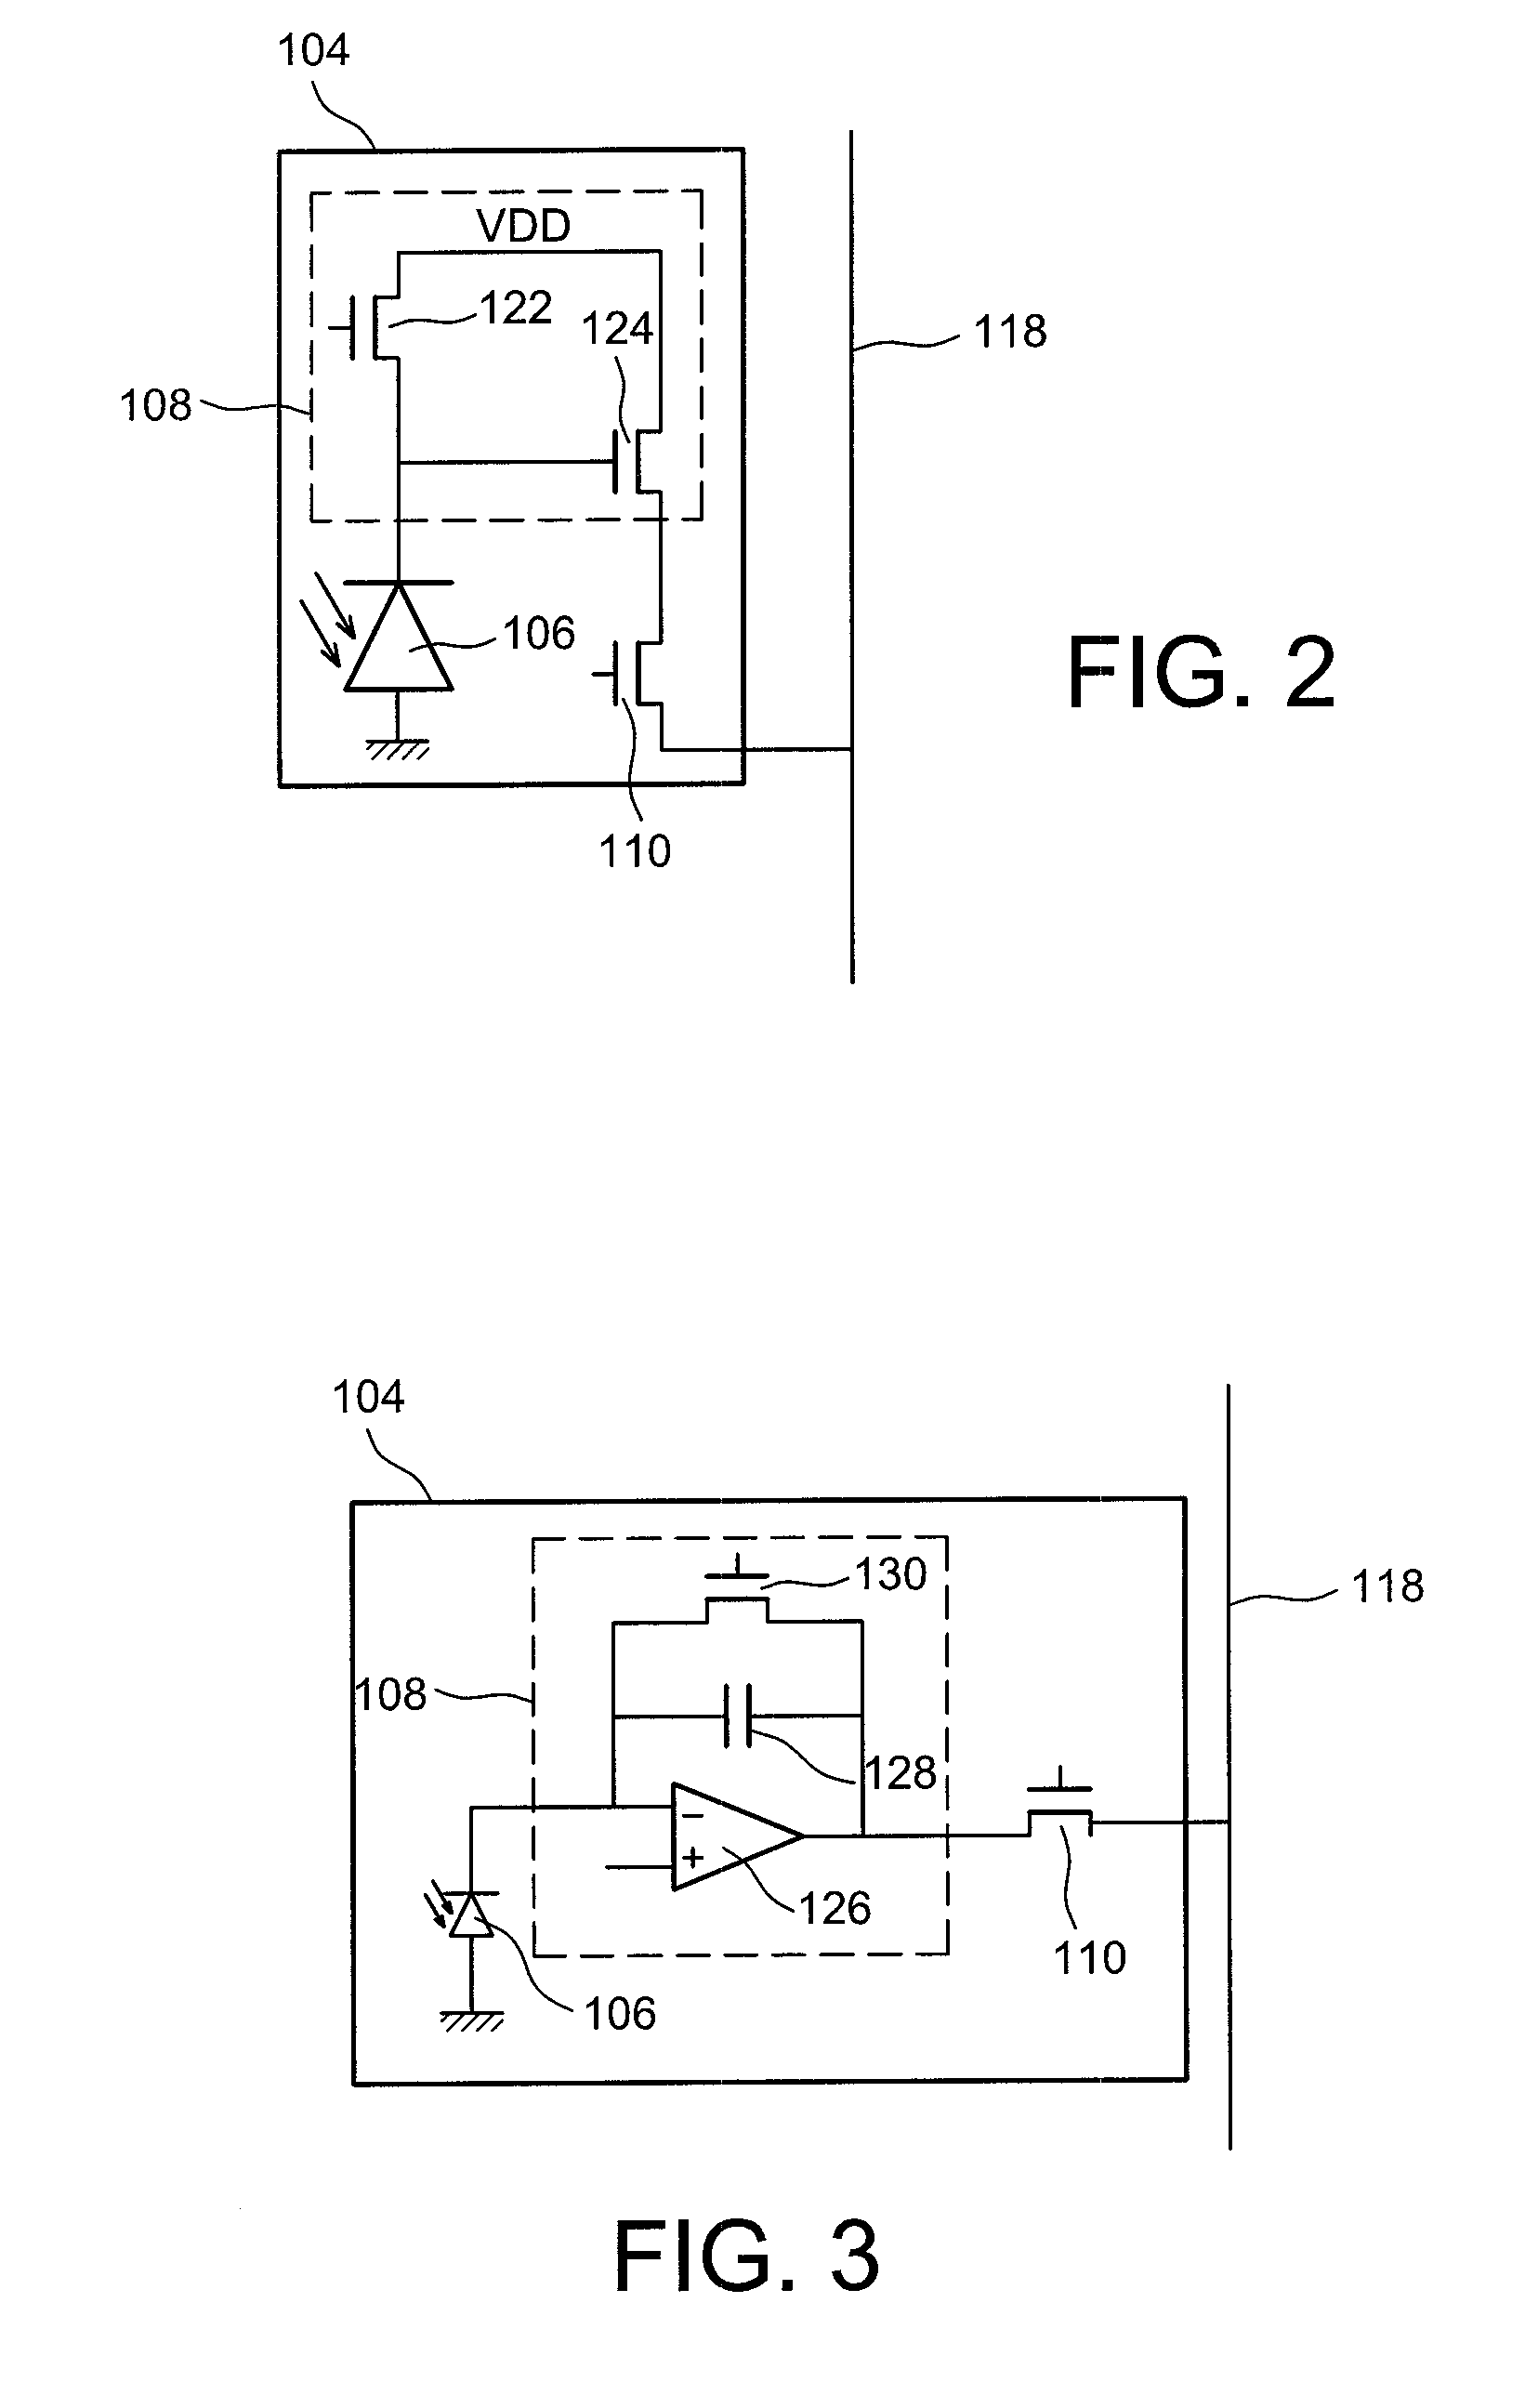 CMOS imaging device with three-dimensional architecture